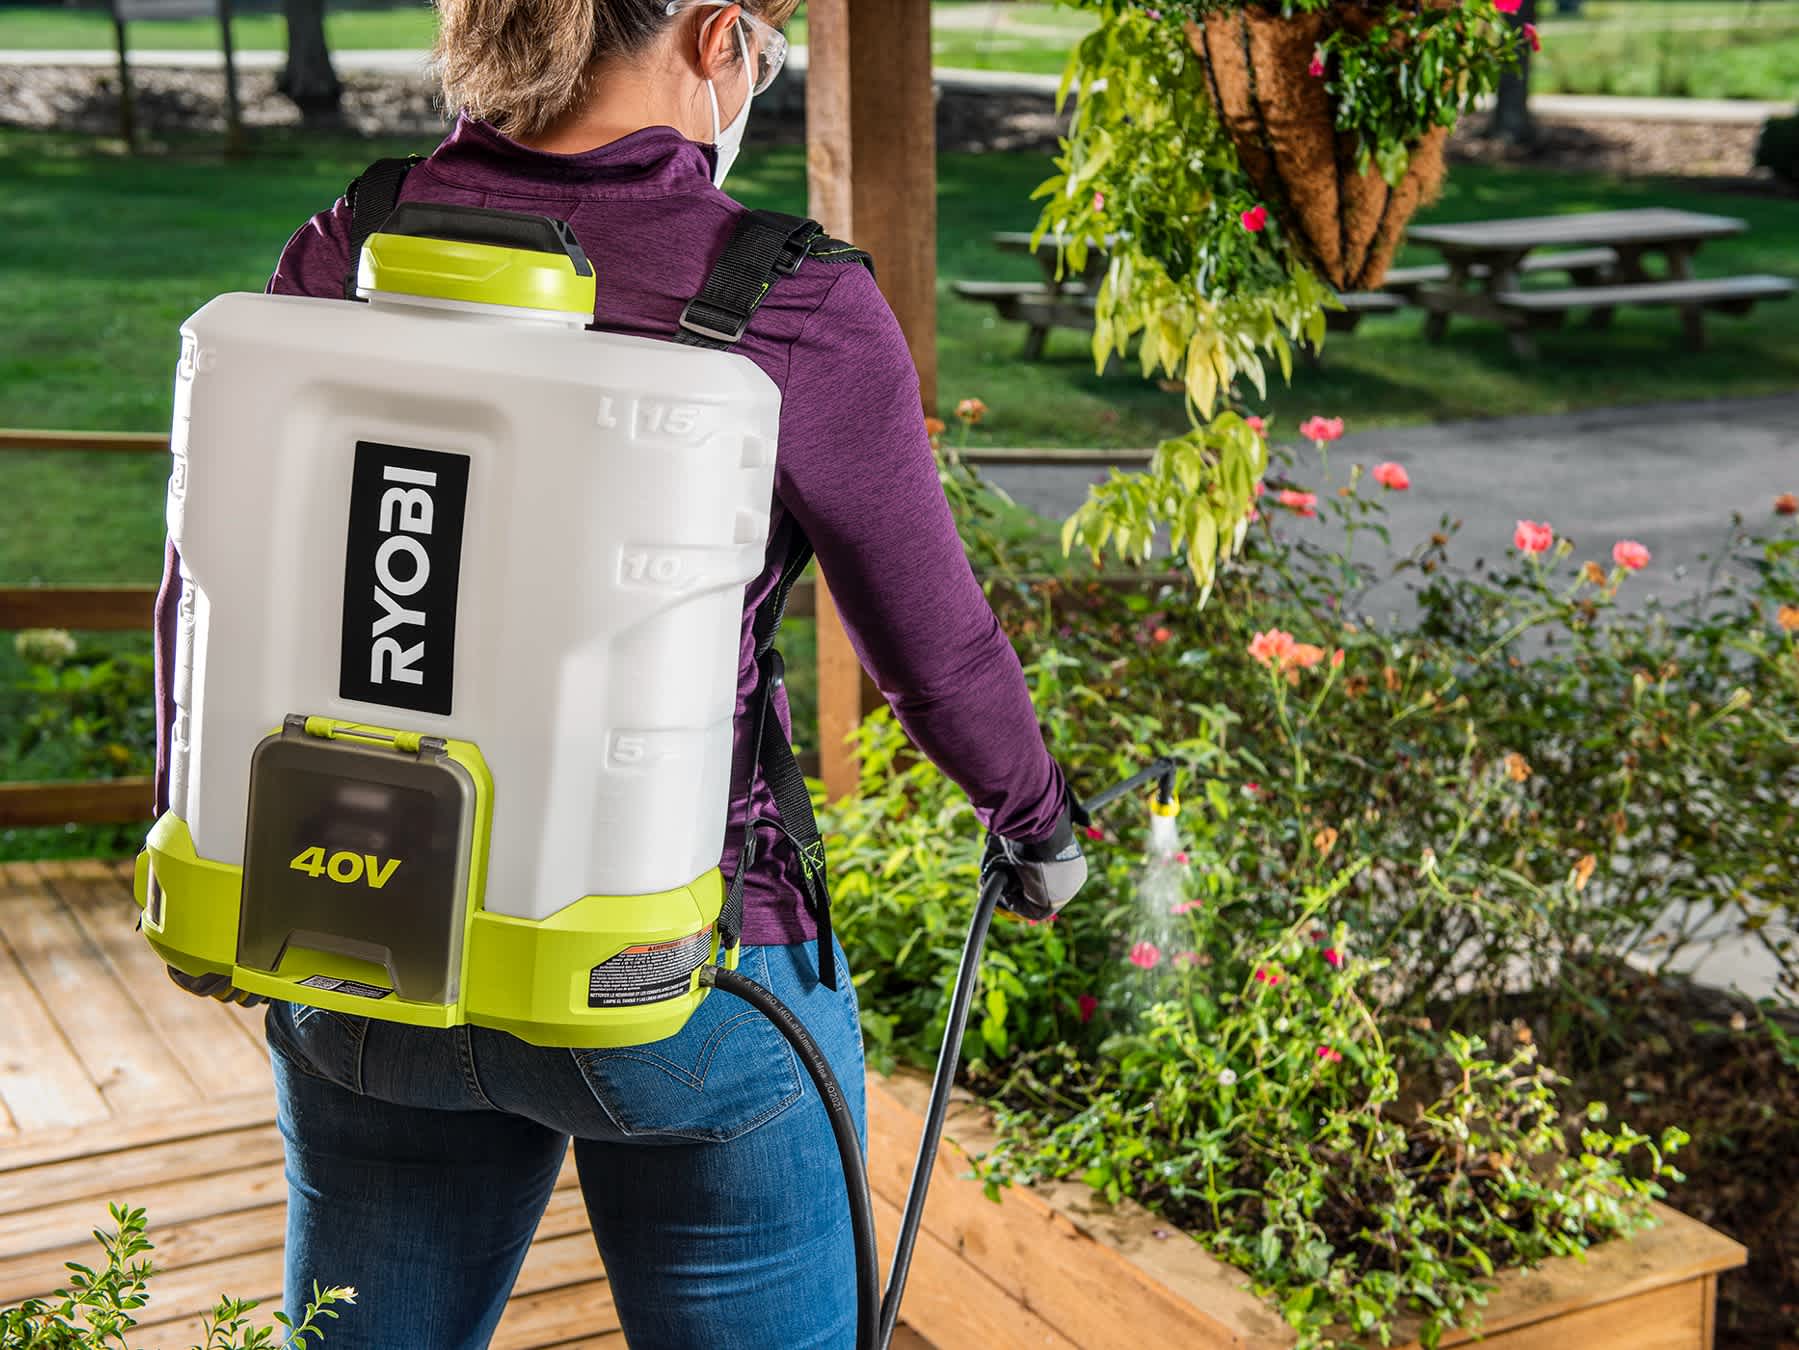 Product Features Image for 40V 4 GALLON BACKPACK CHEMICAL SPRAYER.